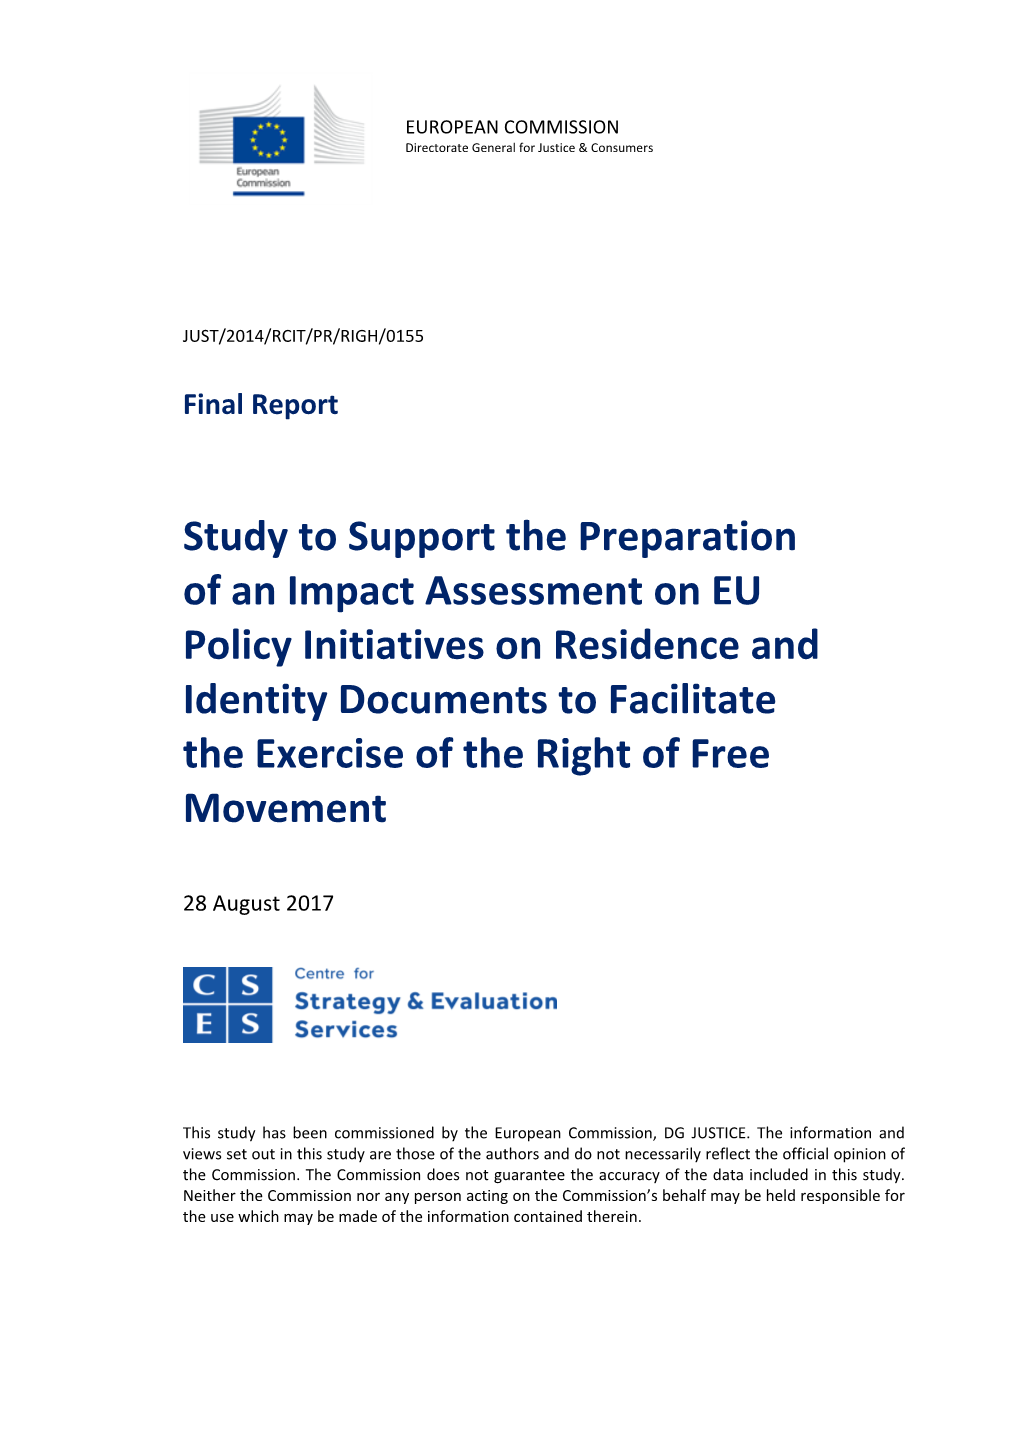 Study to Support the Preparation of an Impact Assessment on EU Policy